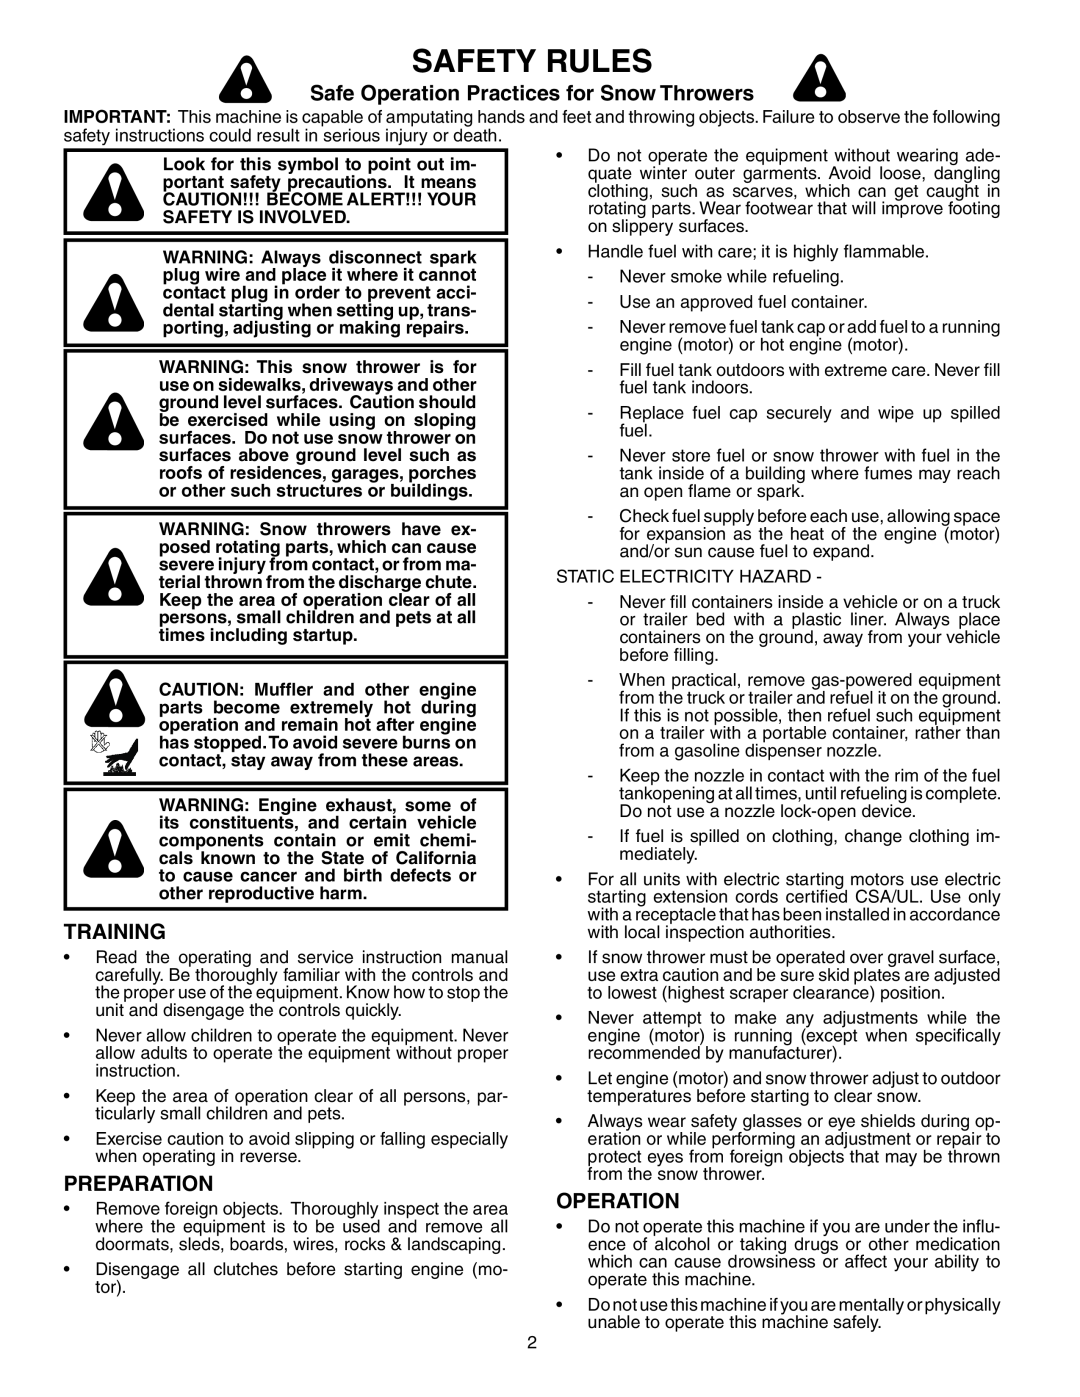 Husqvarna 1027STE owner manual Safety Rules, Safe Operation Practices for Snow Throwers, Training, Preparation 